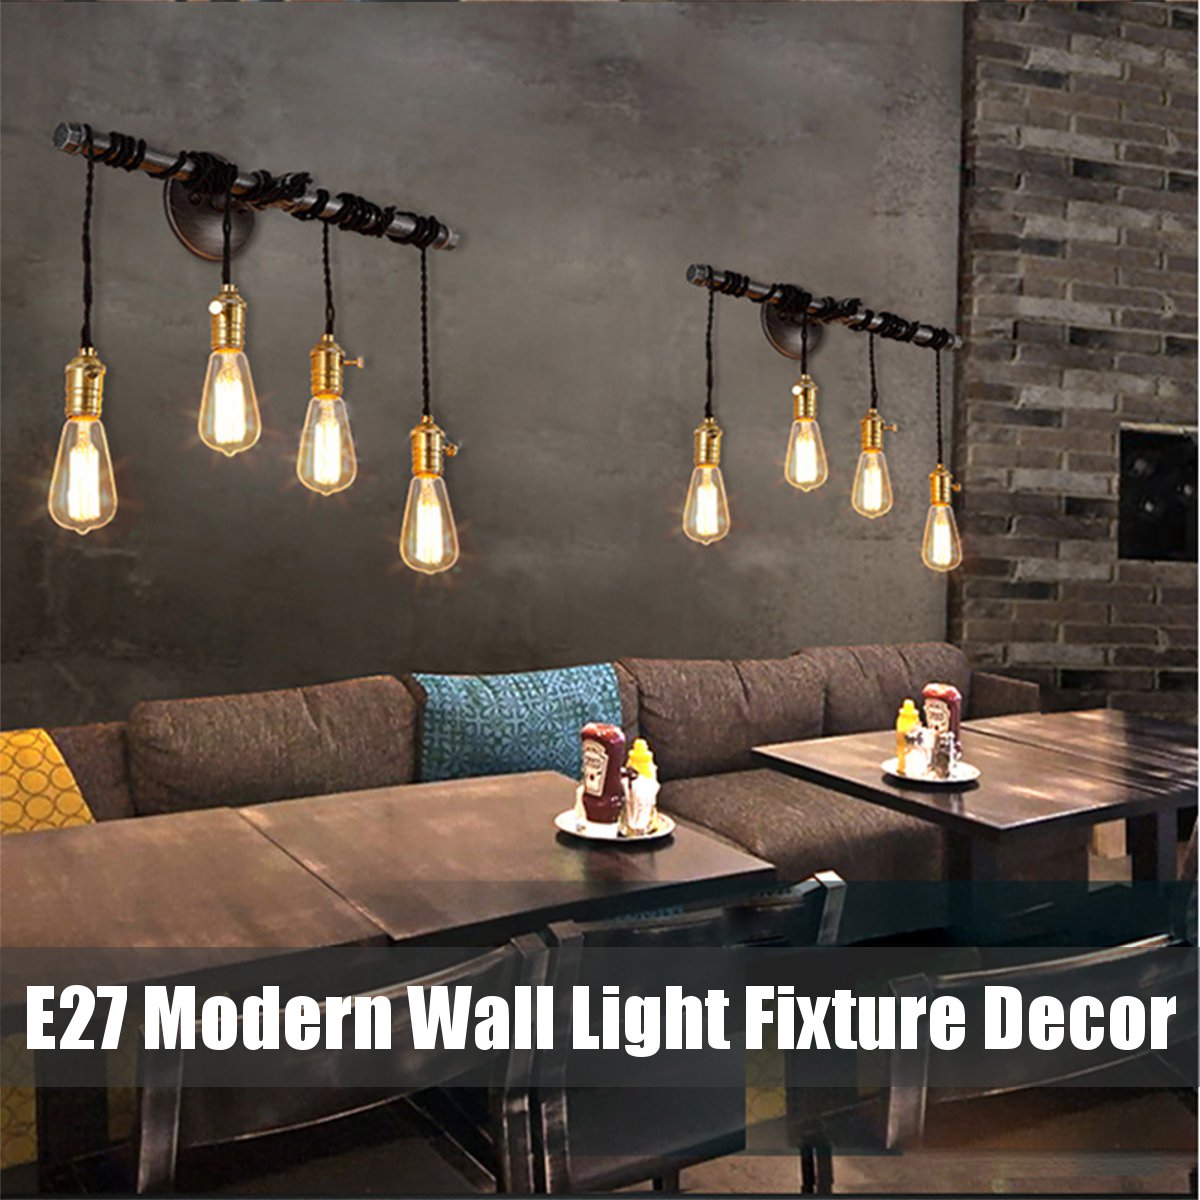 E27-Industrial-Vintage-Retro-Wall-Light-with-Switch-Bar-Home-Bedroom-Lamp-Fixture-Decoration-AC85-26-1679002-1